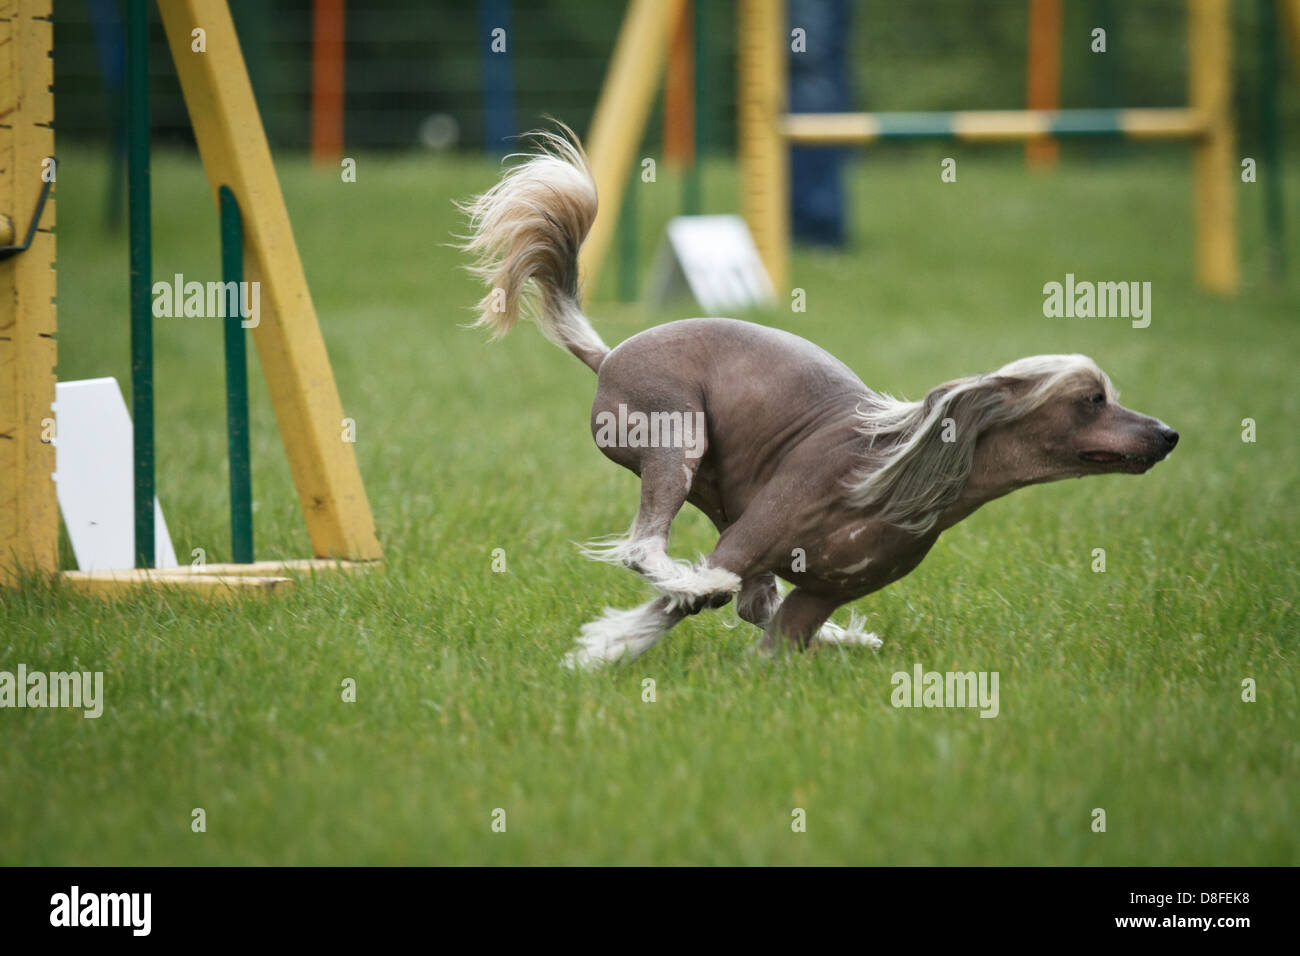 Chinese crested dog in agility competition. Stock Photo